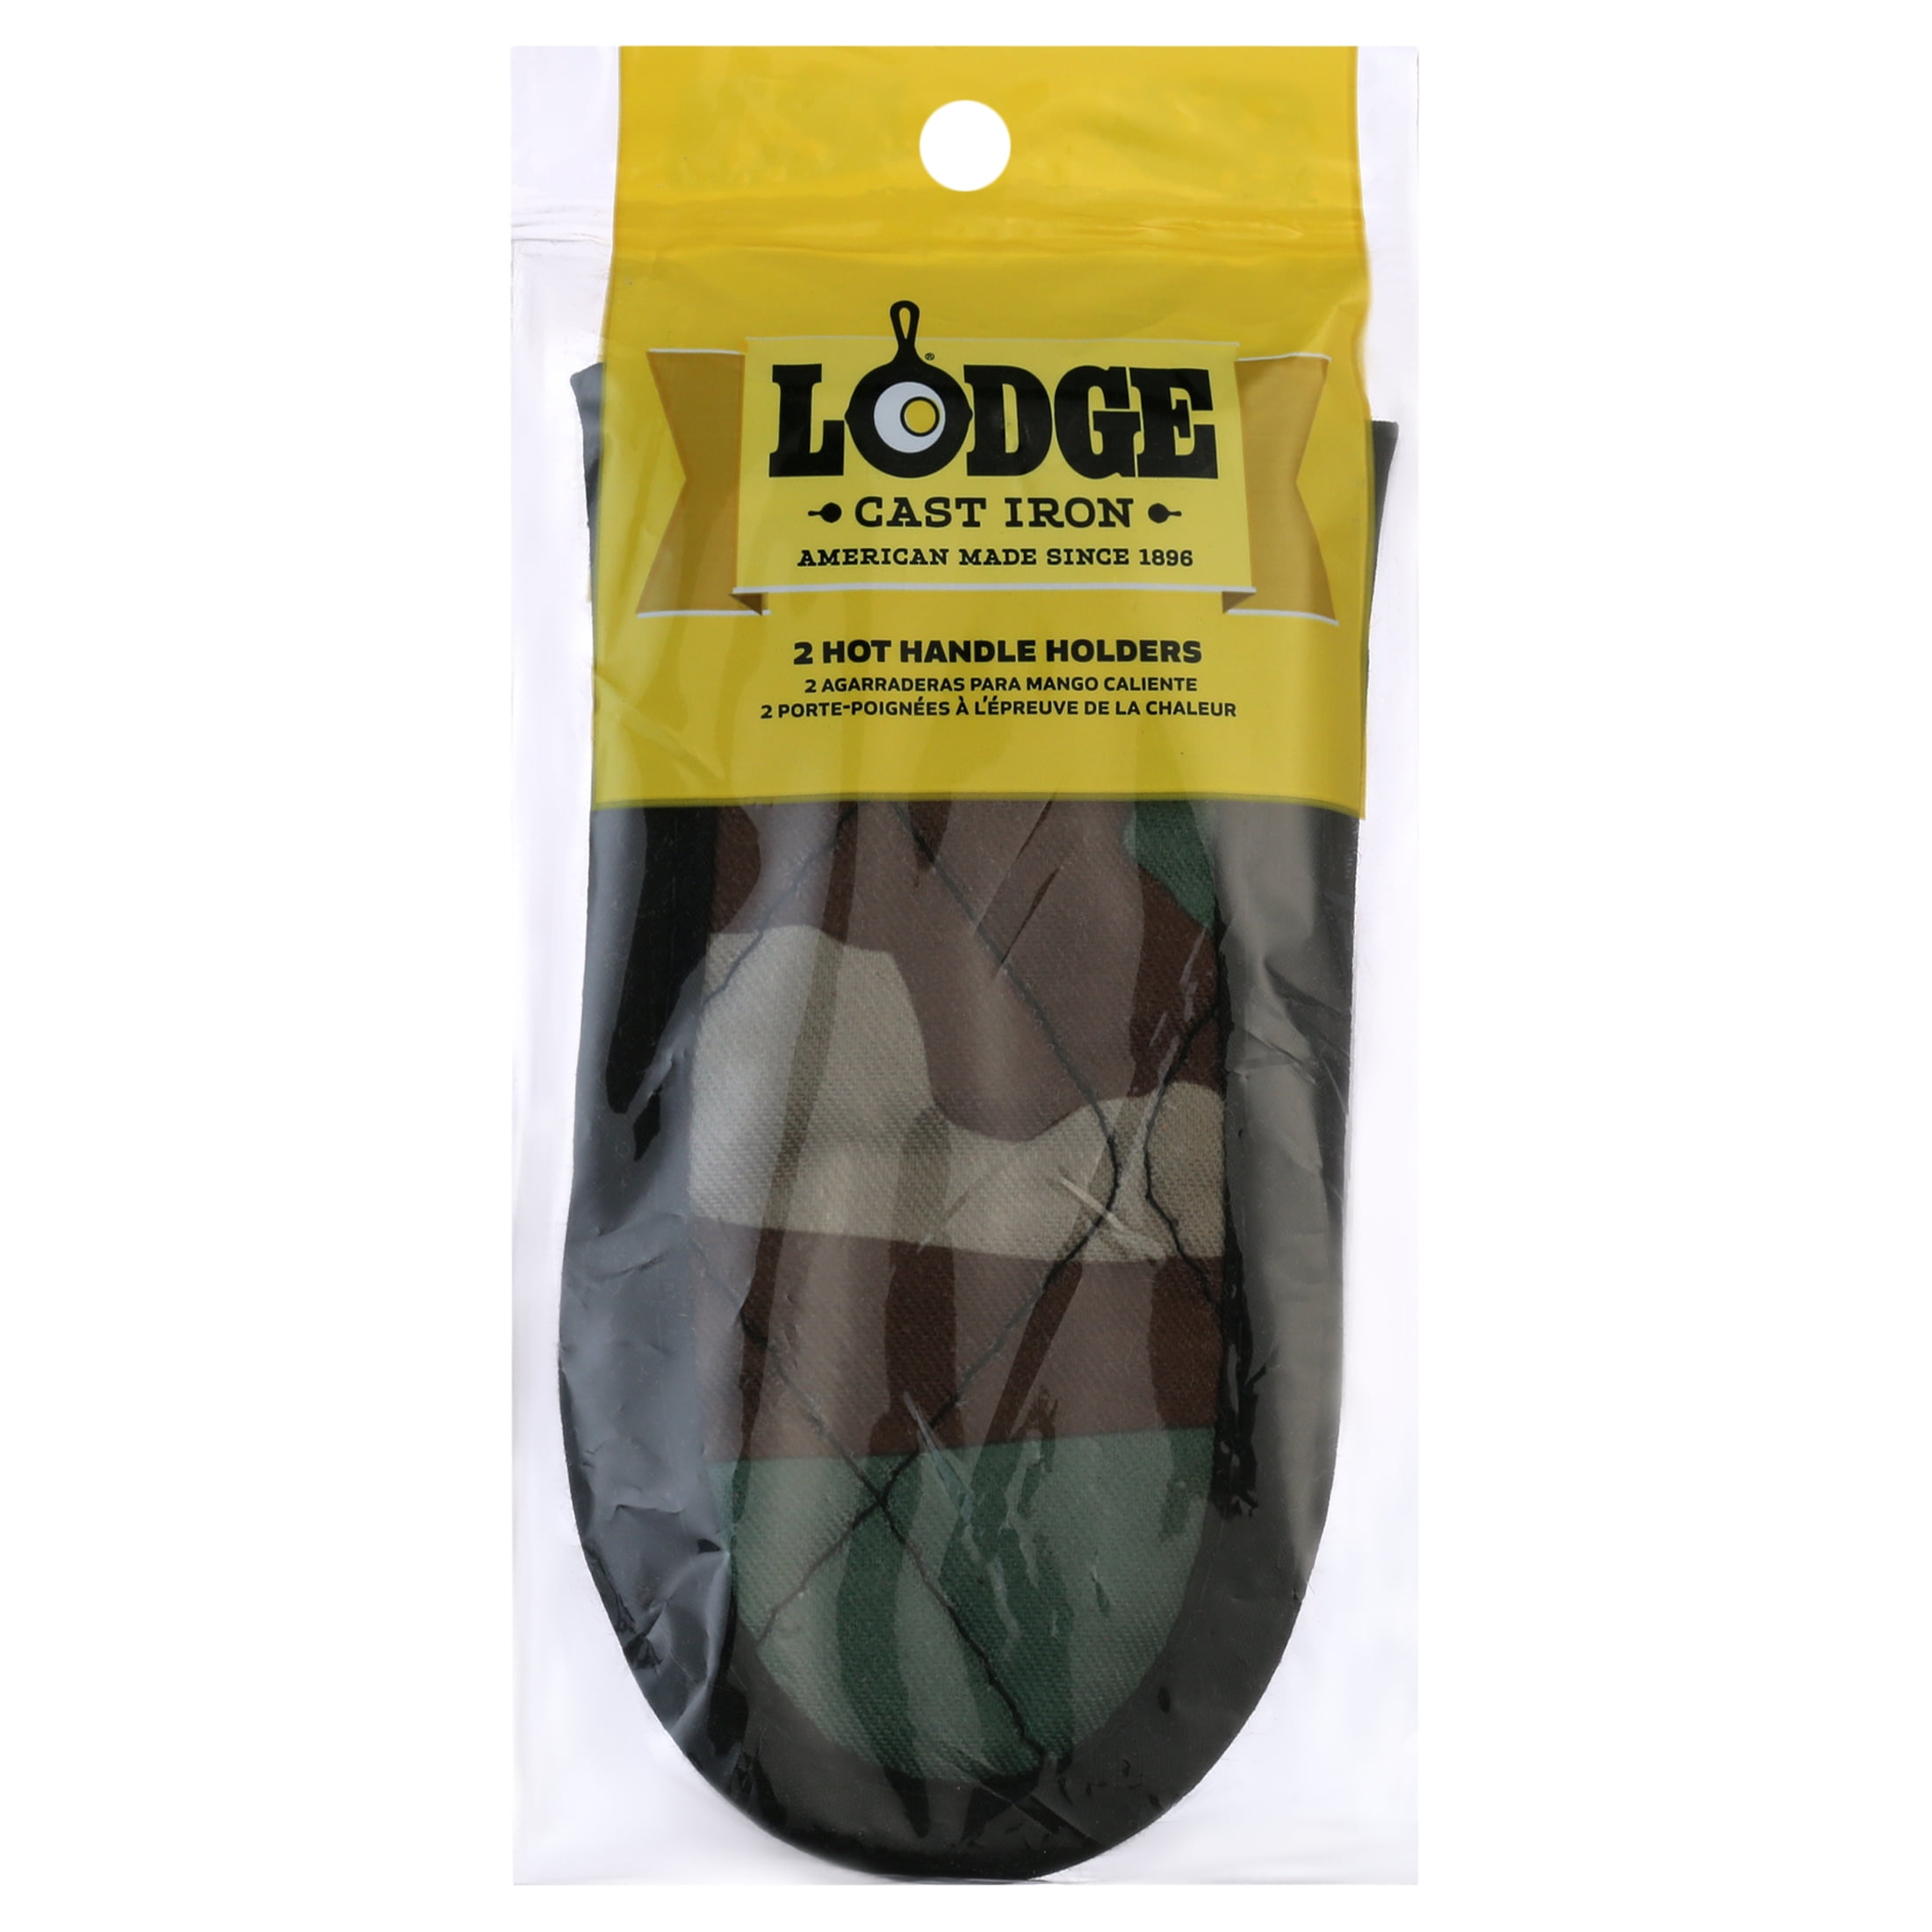 Lodge Striped Hot Handle Holders/Mitts - 2 pack